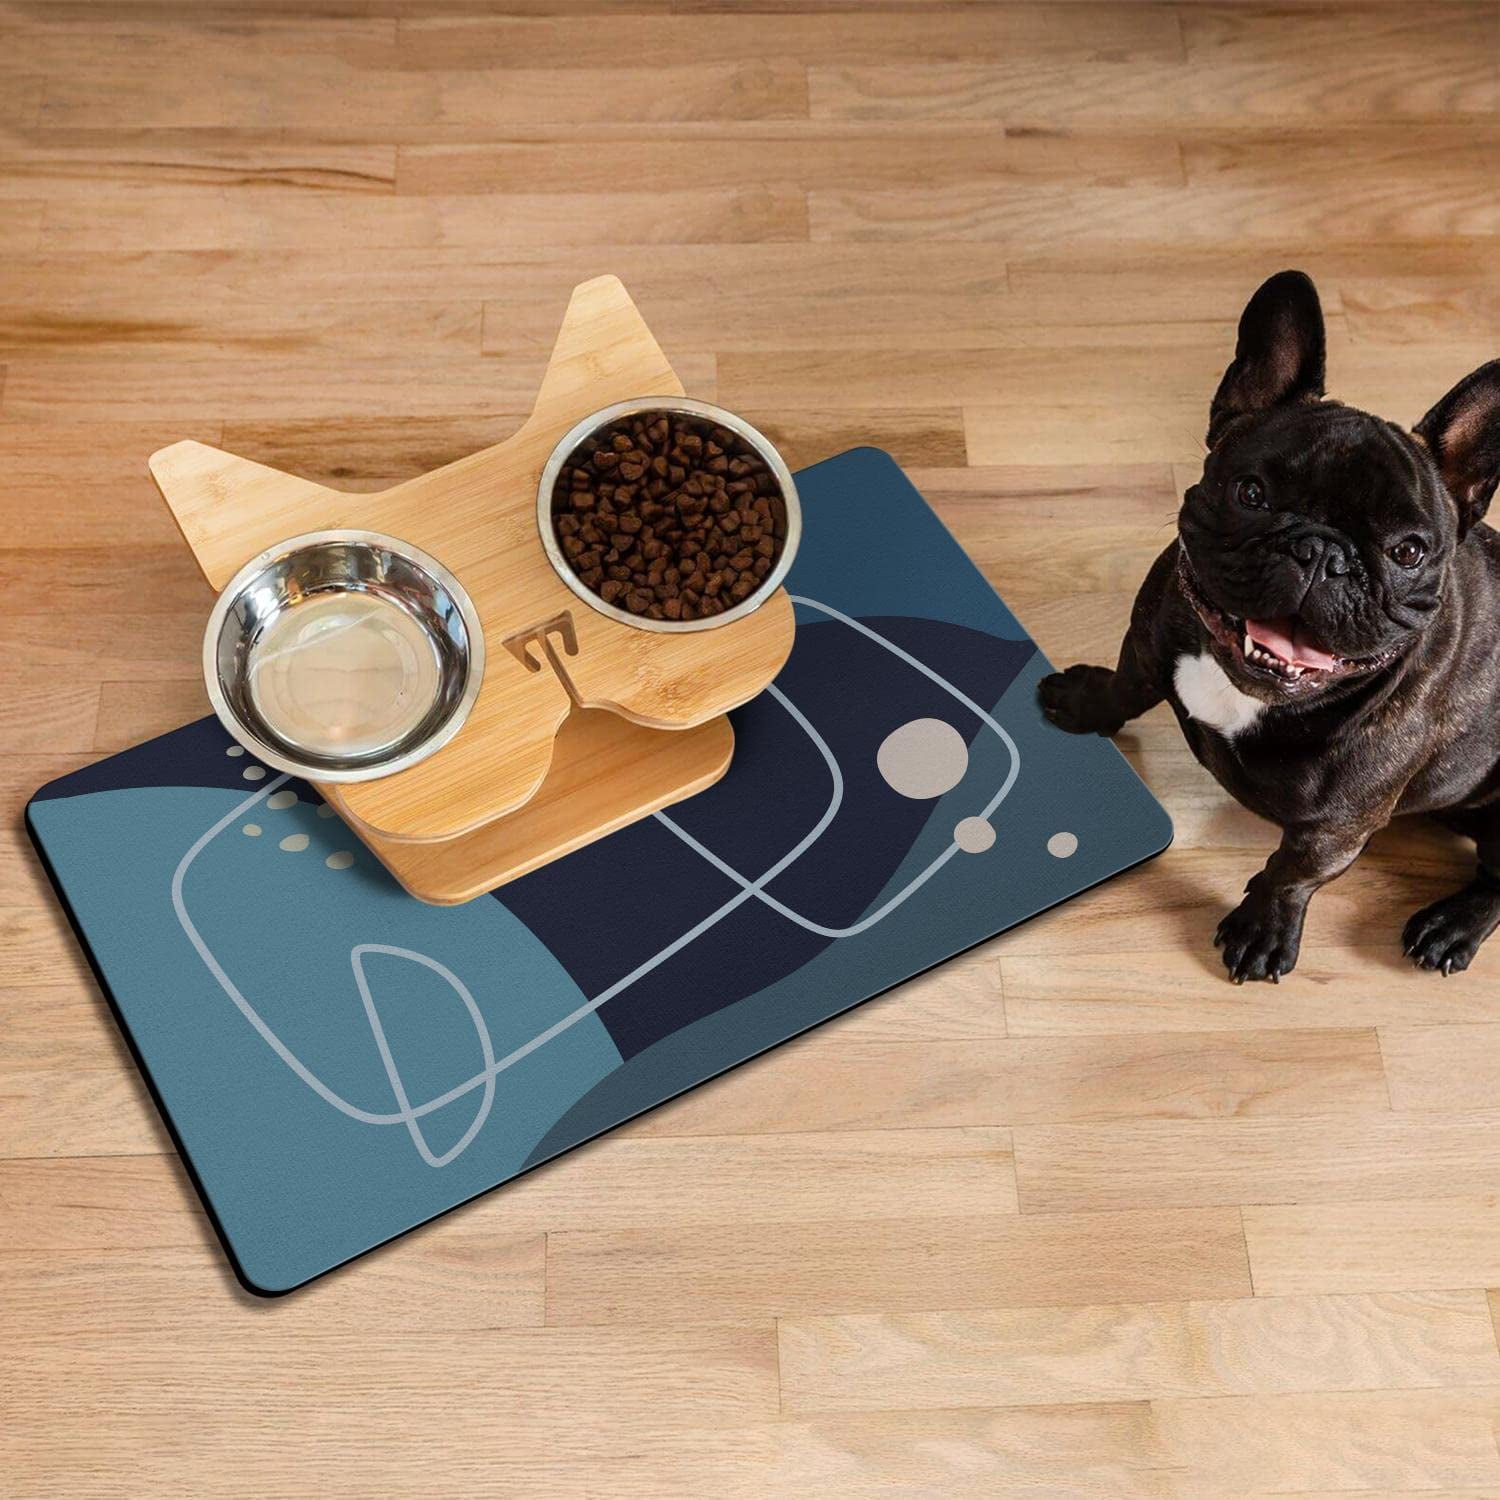 Extra Large Dog Placemat Cat Pet Food Feeding Mat,Rainbow Mat for Dog Bowls  and Water,Water Absorbent,Non Slip Placemat,Easy to Clean,30x17 